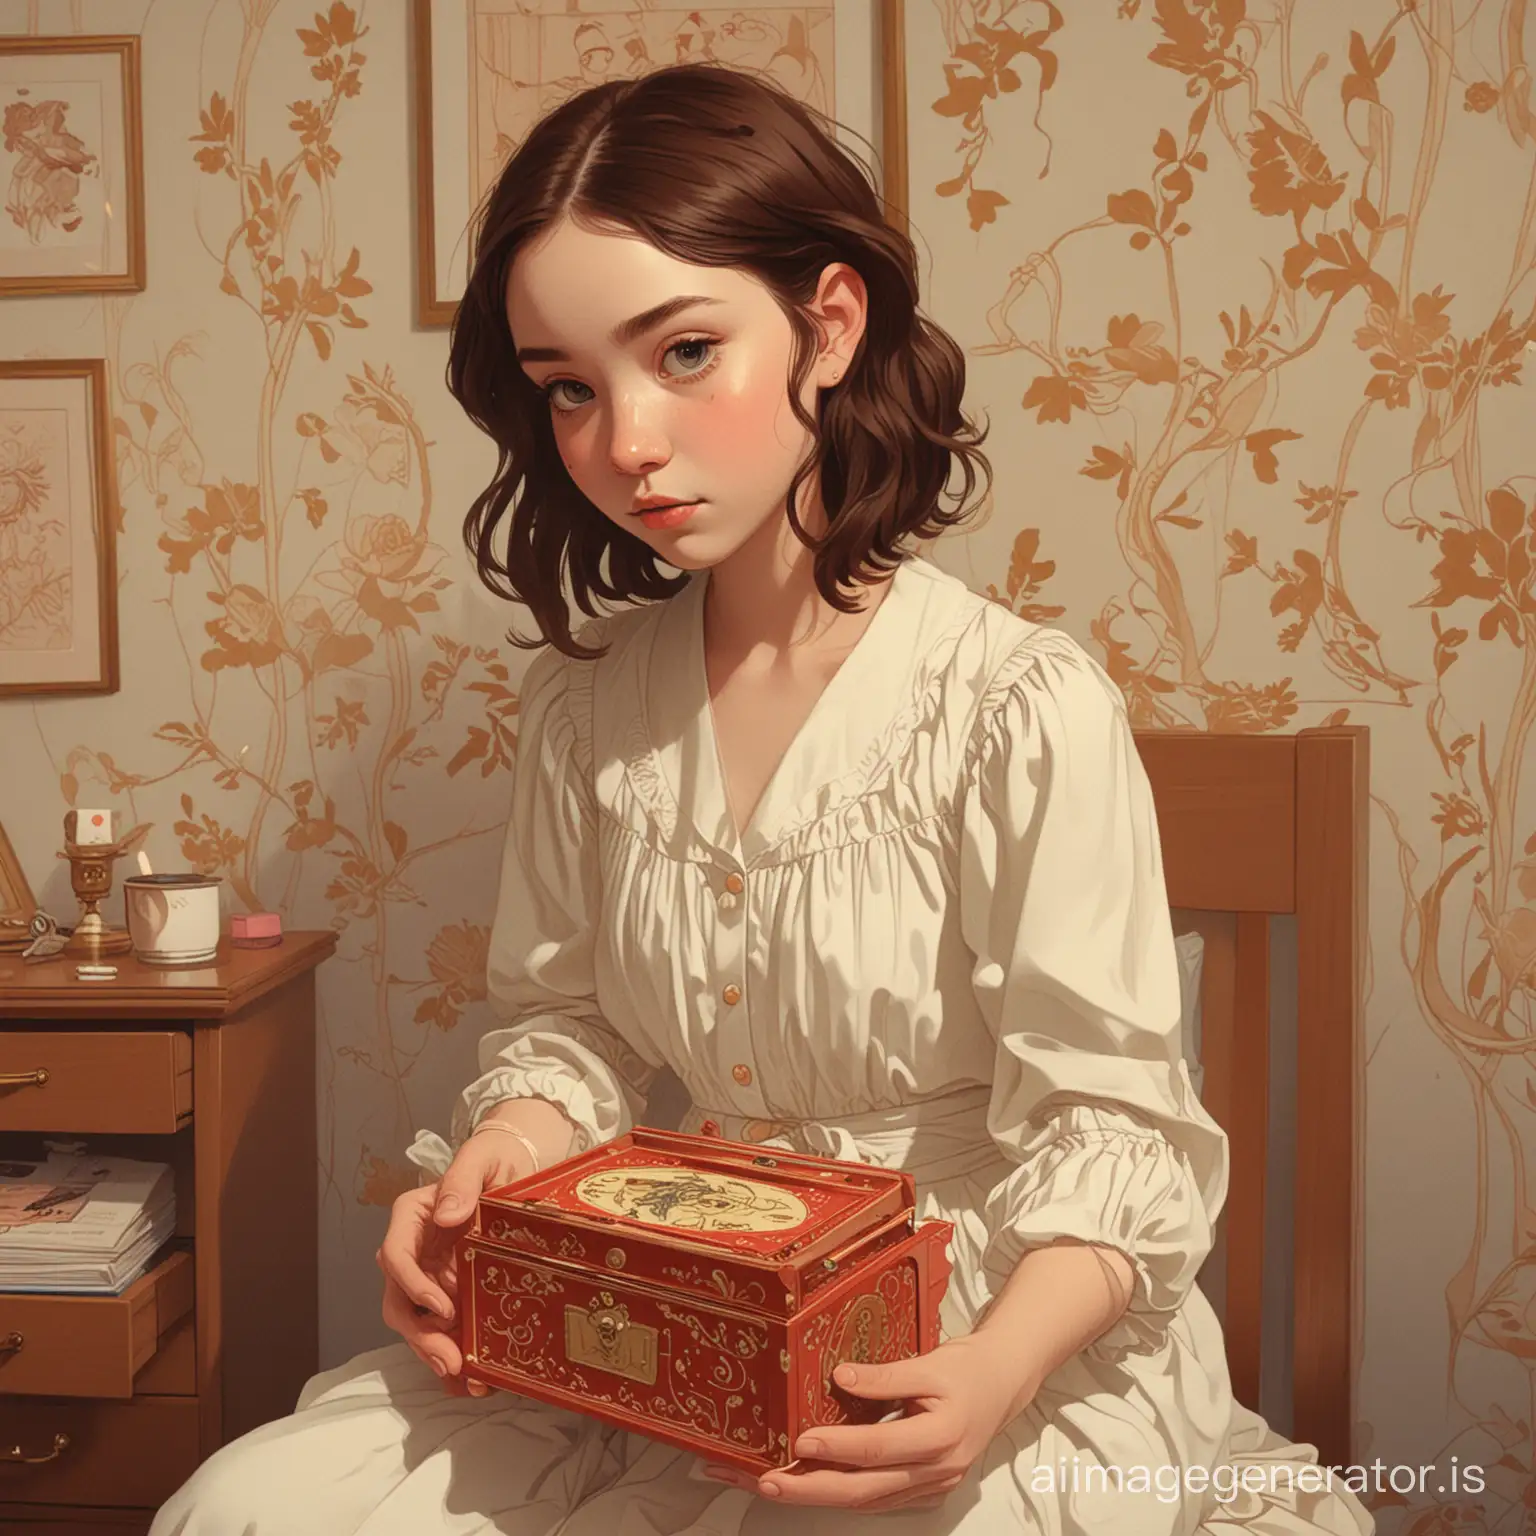 Sweet-Little-Girl-Holding-Music-Box-in-Her-Room-with-Detailed-Artwork